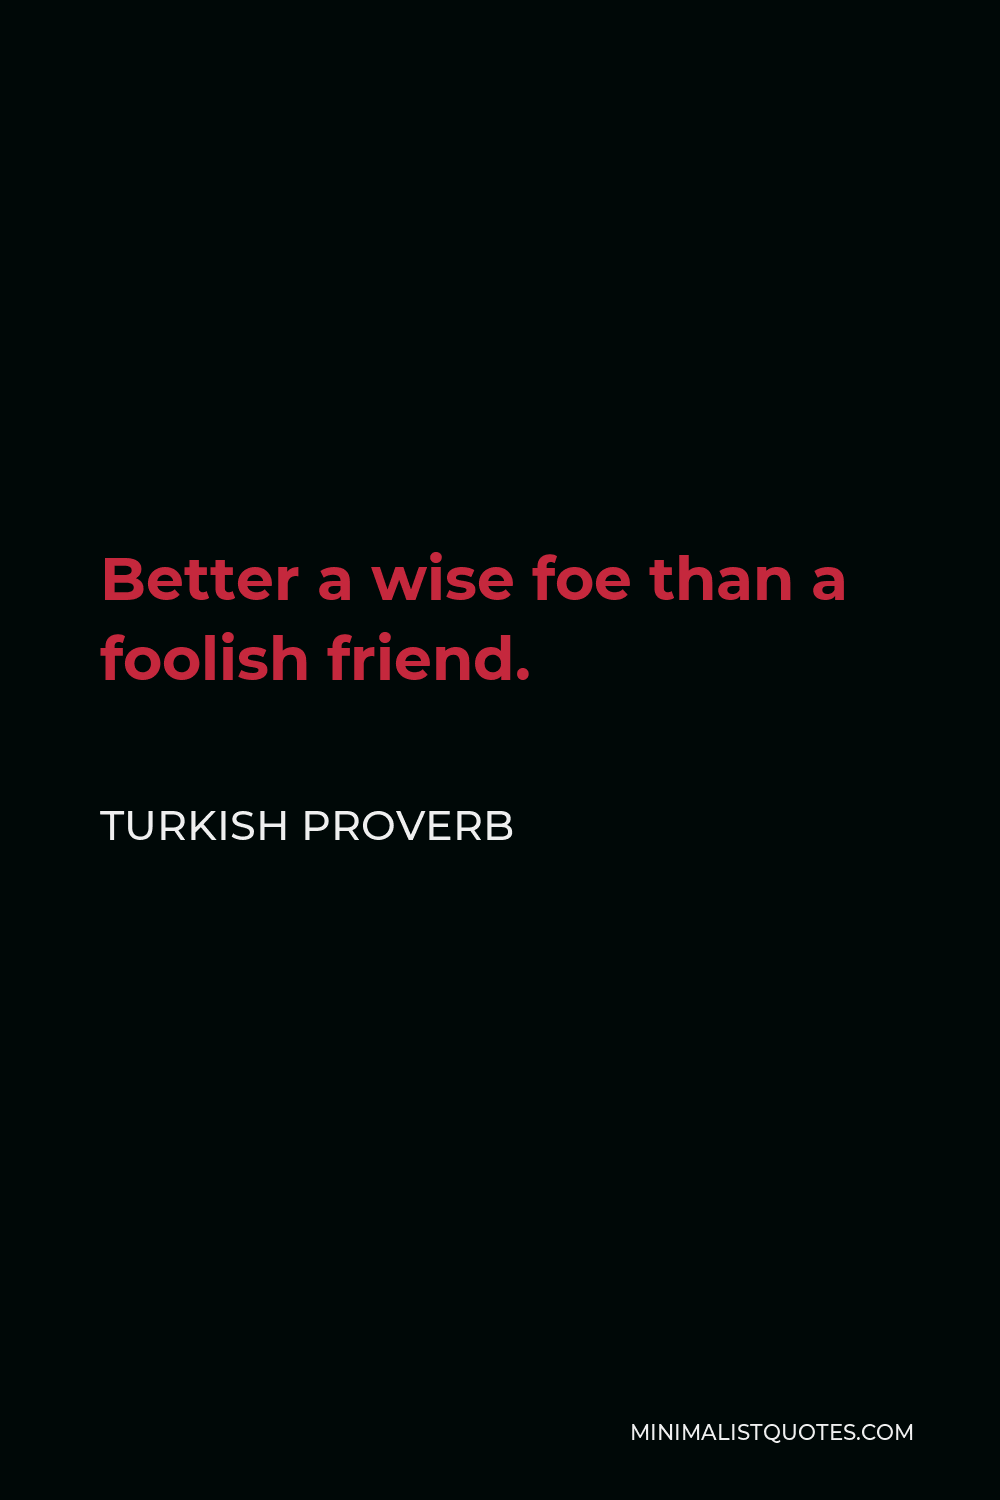 Turkish Proverb Quote - Better a wise foe than a foolish friend.